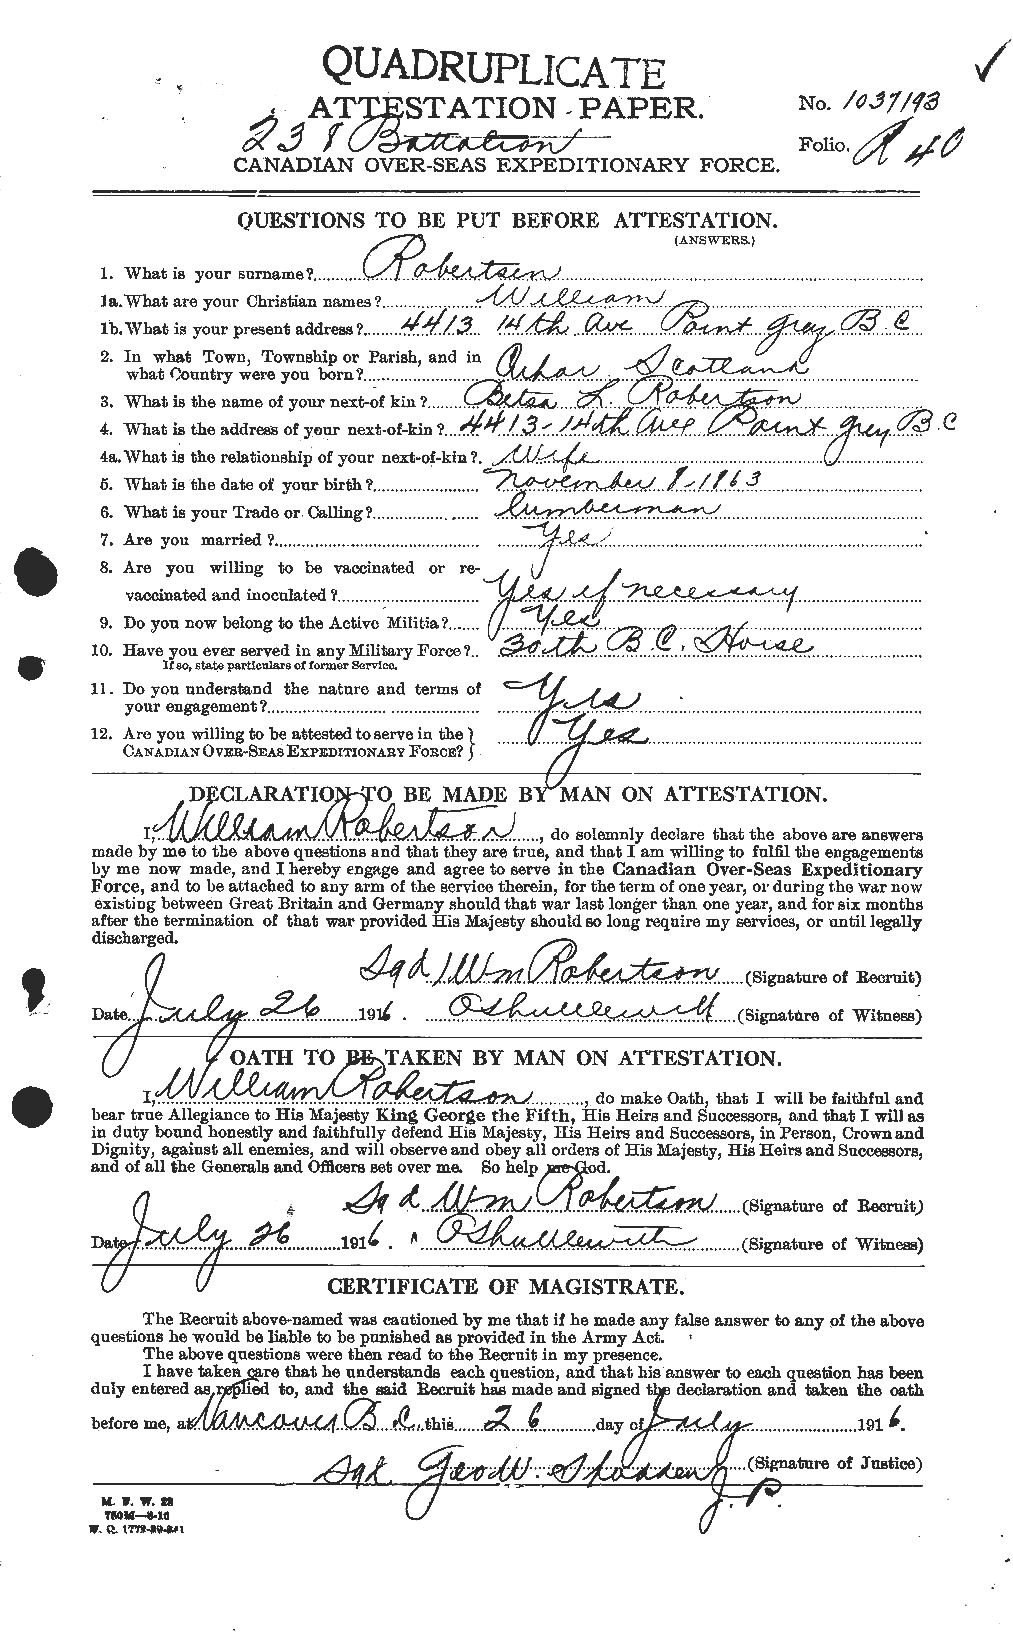 Personnel Records of the First World War - CEF 611019a